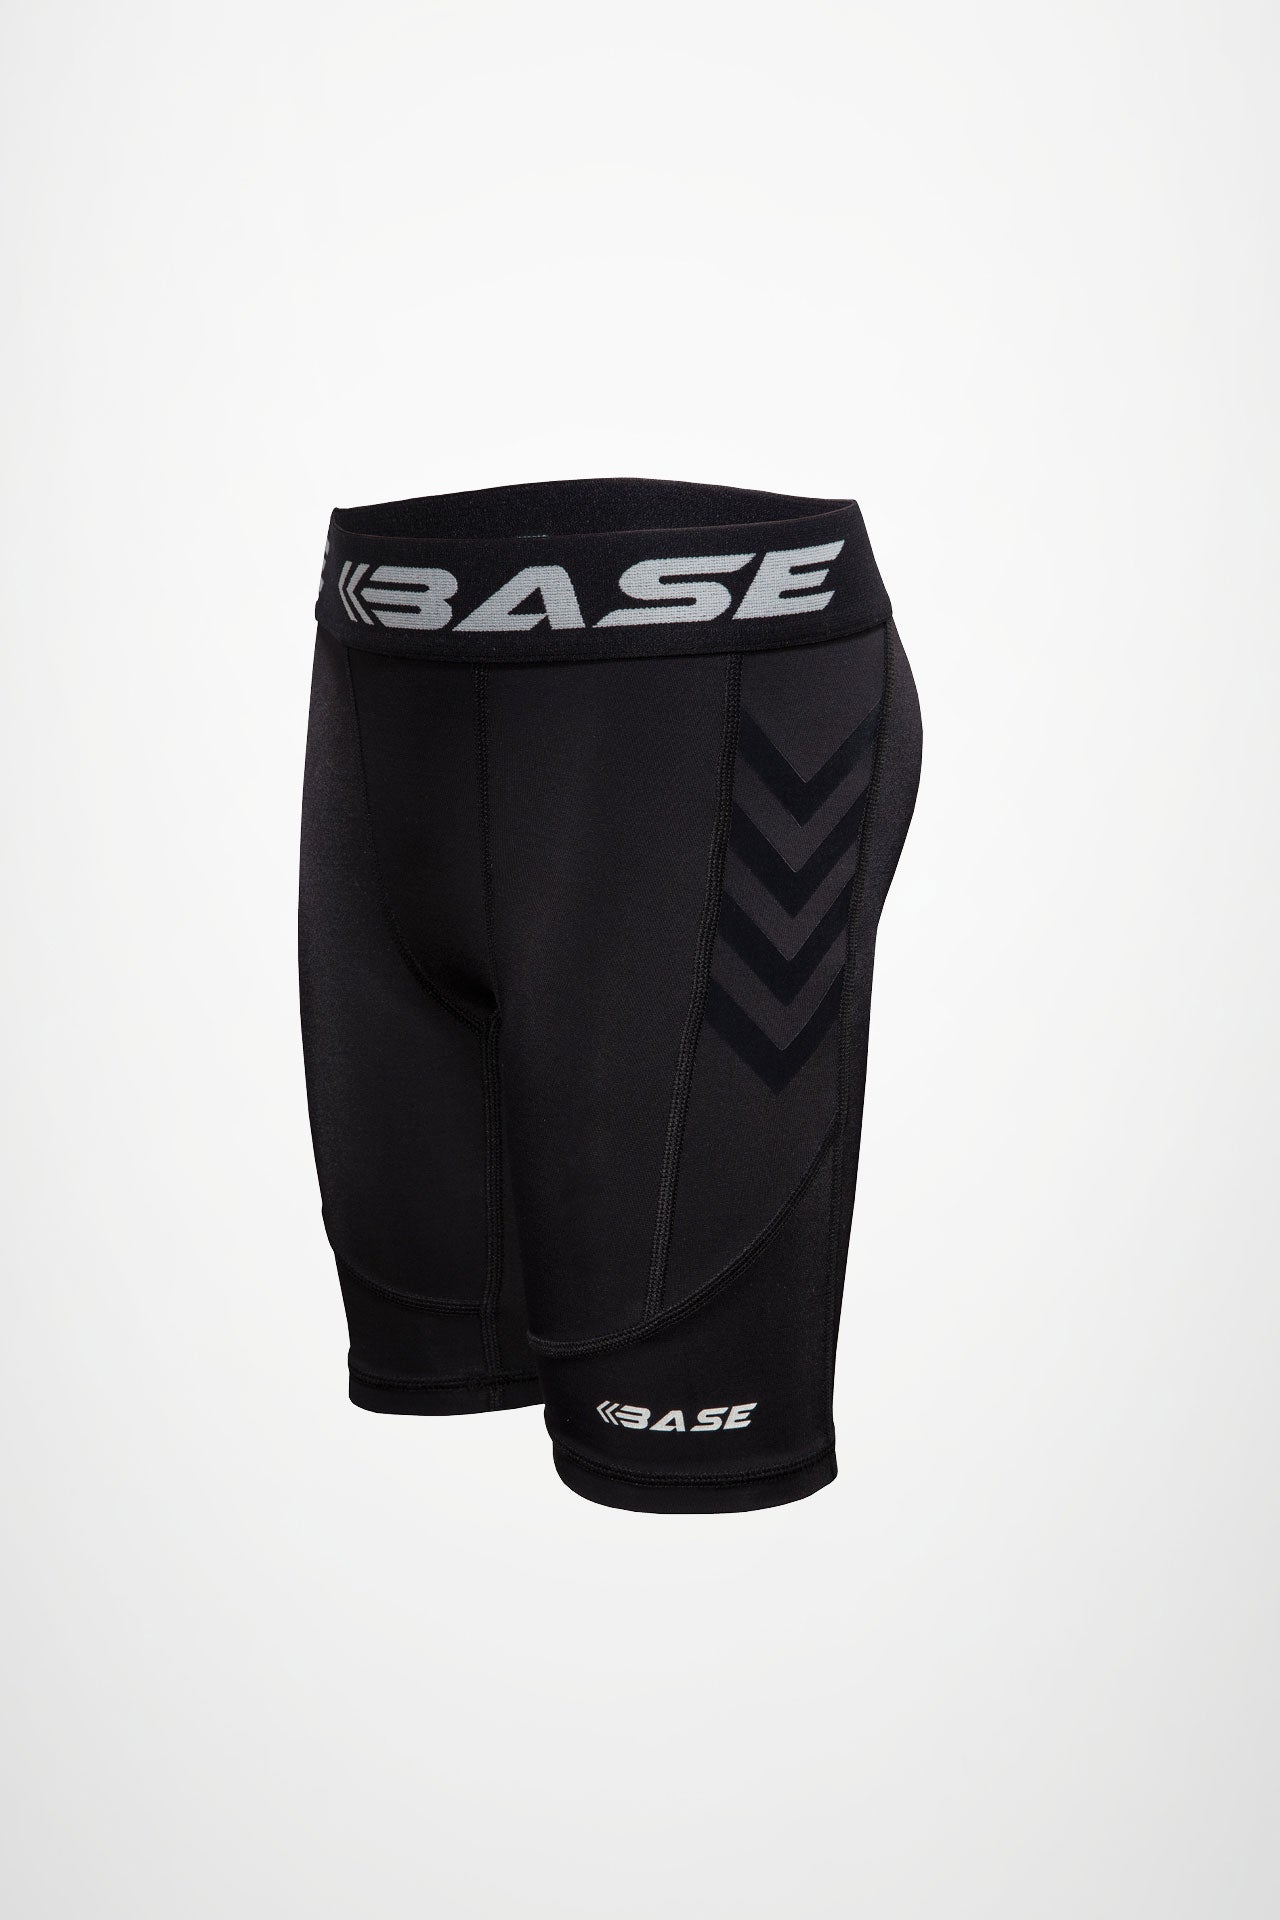 Compression Shorts - Buy Compression Shorts online in India